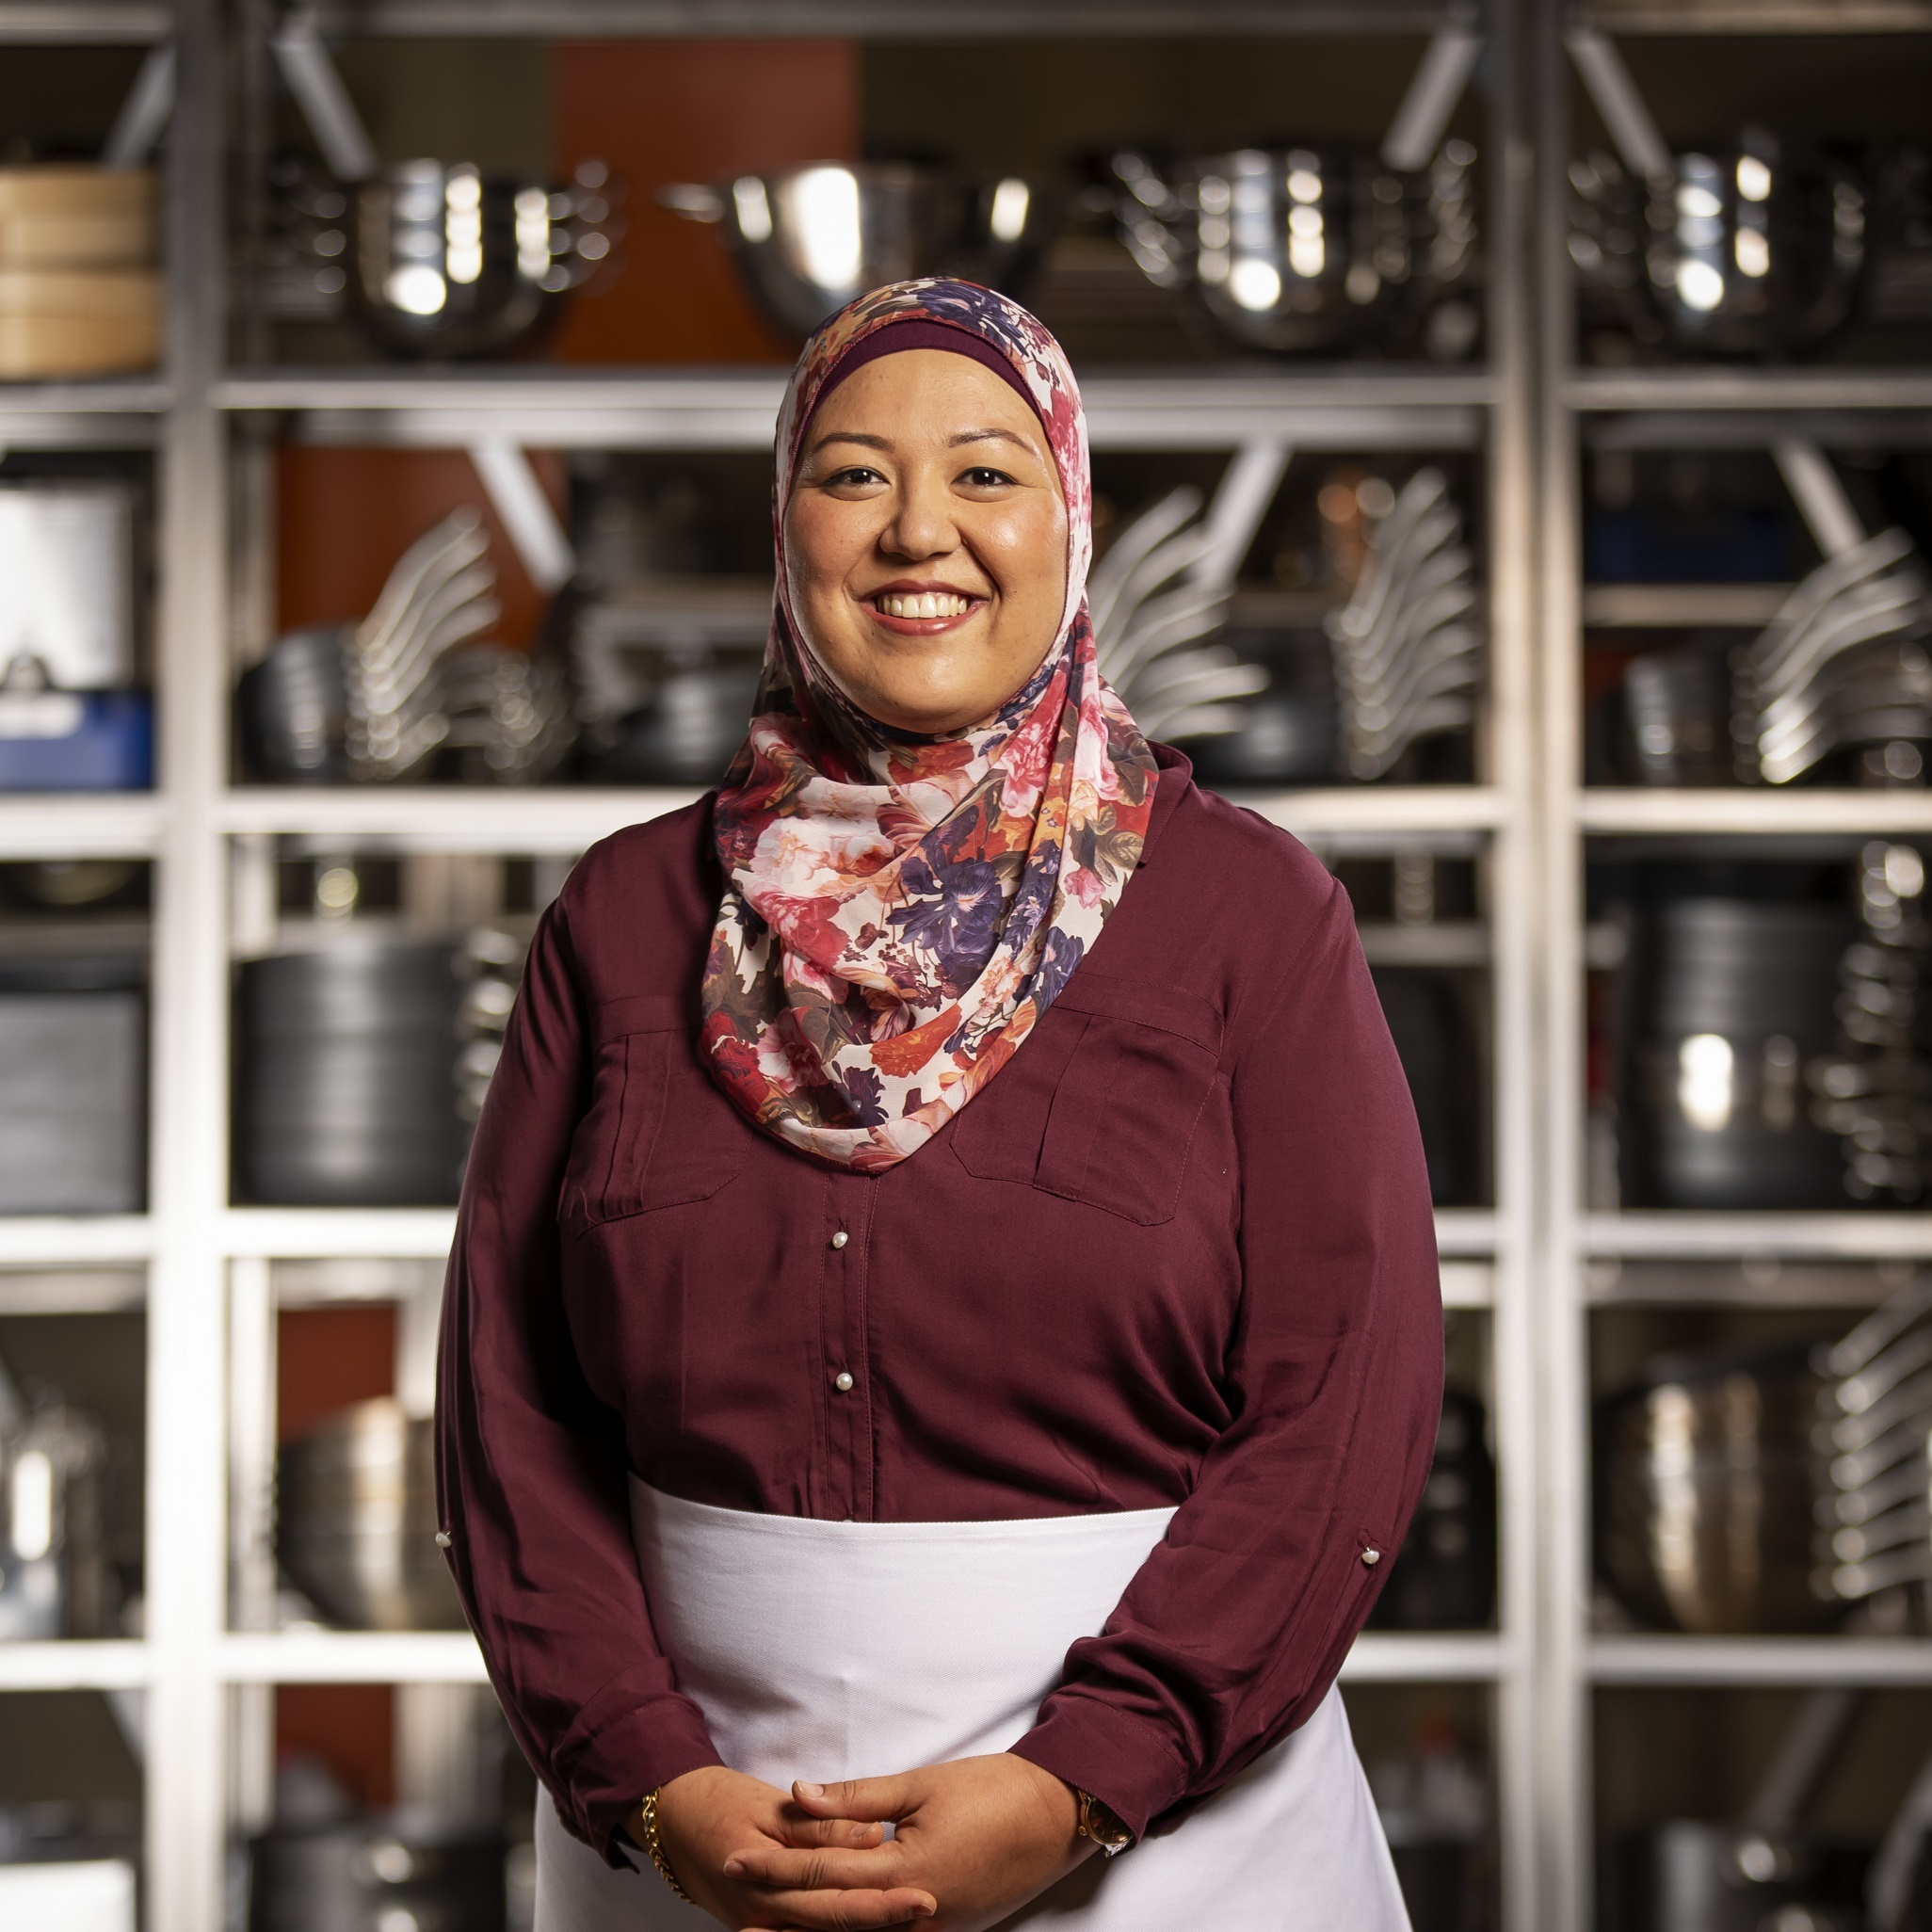 Amina Elshafei Thoughts On The Catering For Masterchef